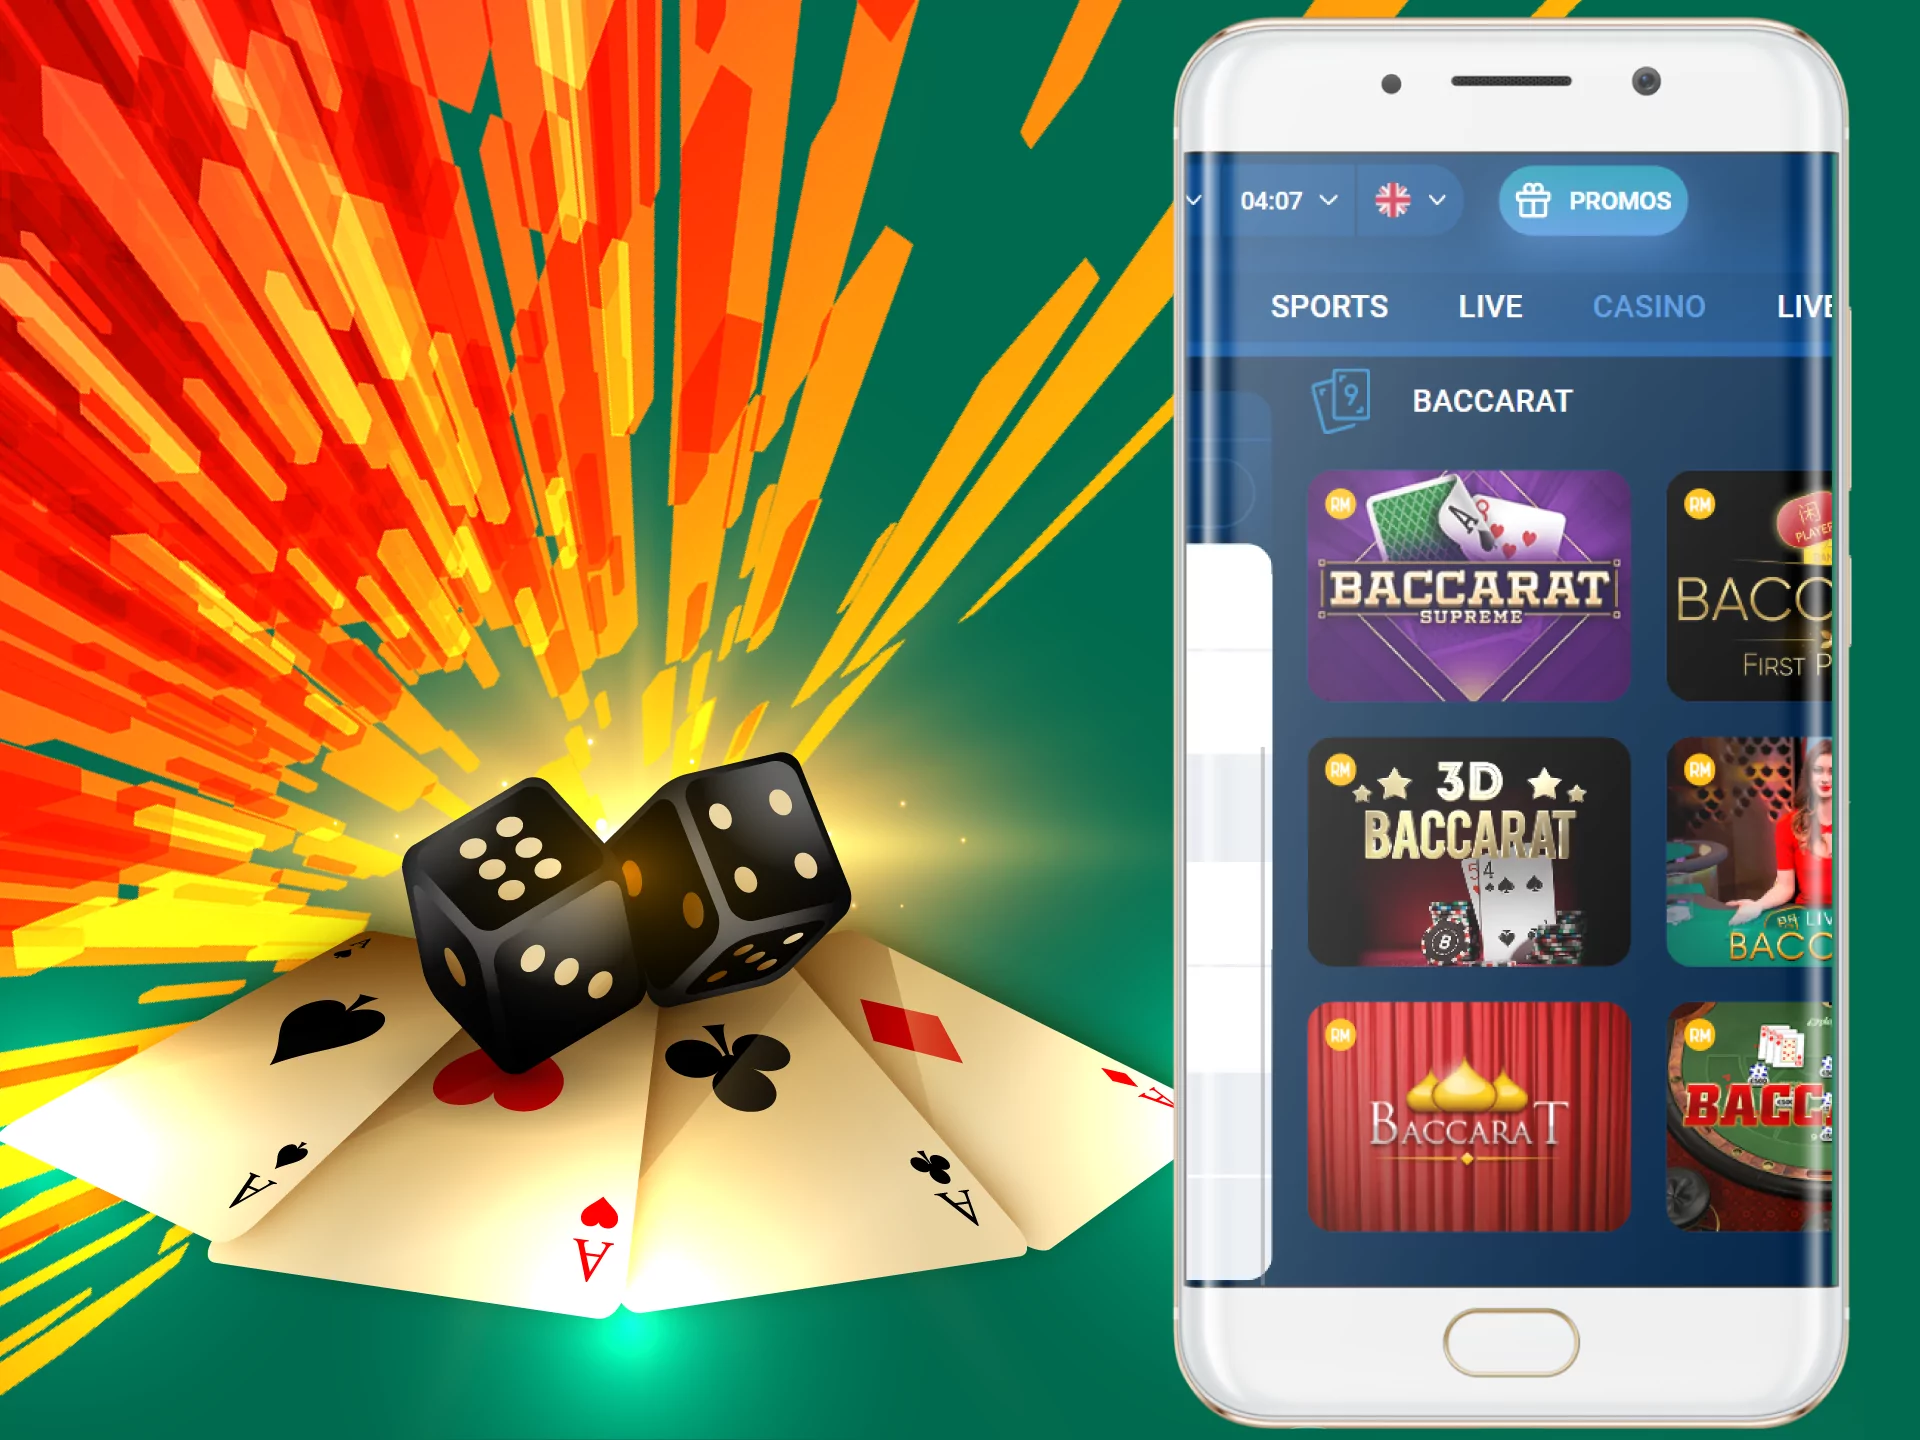 Mostbet casino offers also baccarat games.